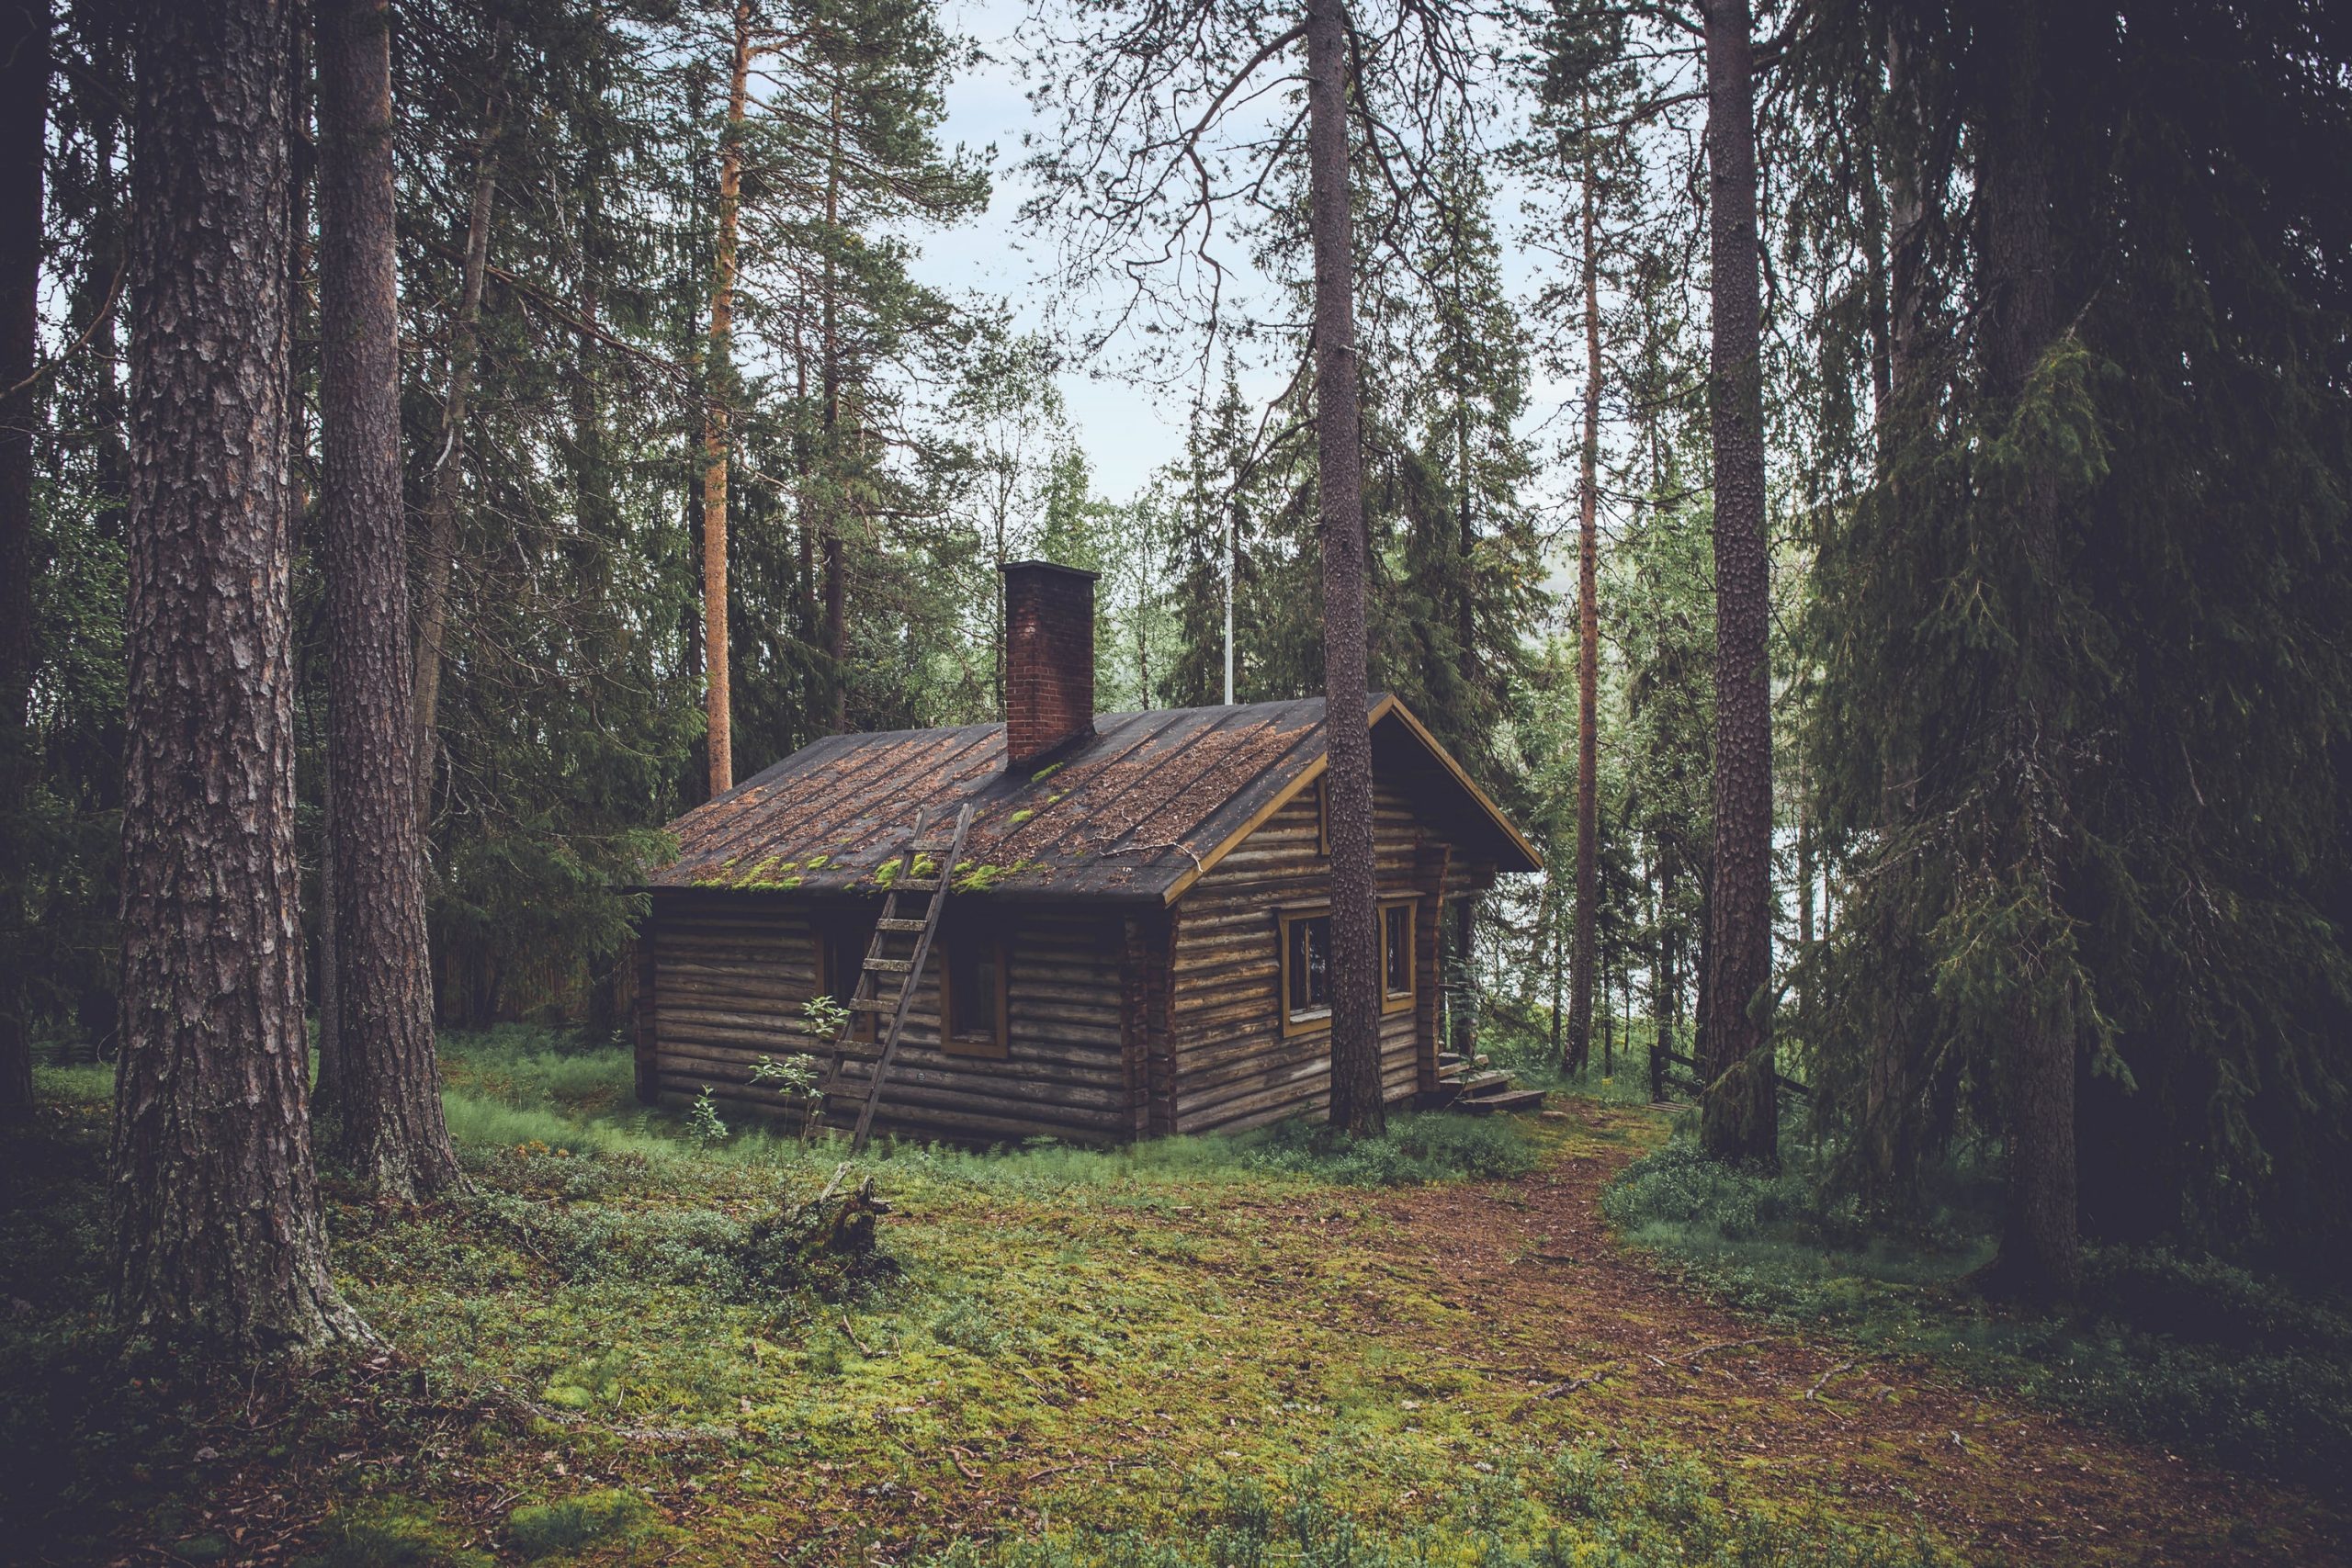 settling down buying a home cabin in the woods